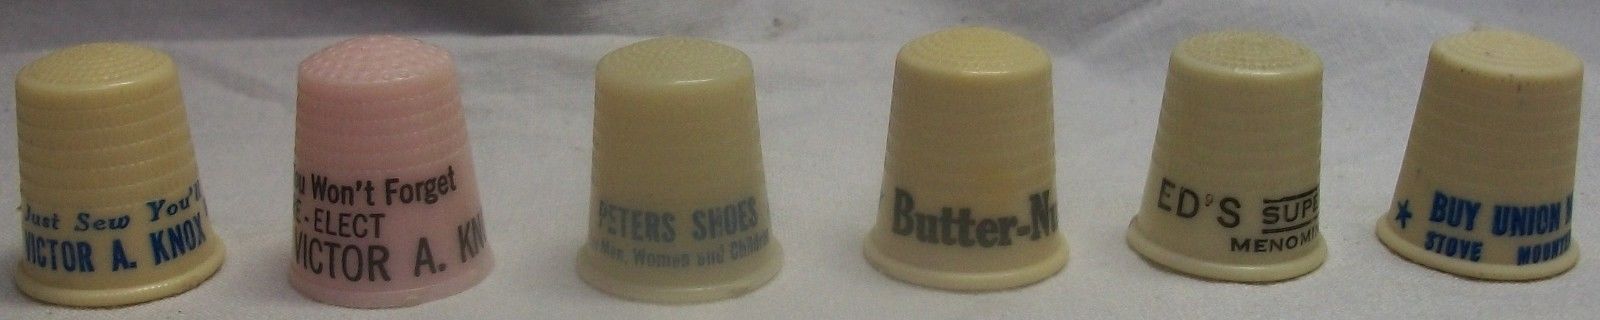 6 VINTAGE ADVERTISING THIMBLES: 2 VICTOR KNOX, PETERS SHOES, BUTTER-NUT + 2